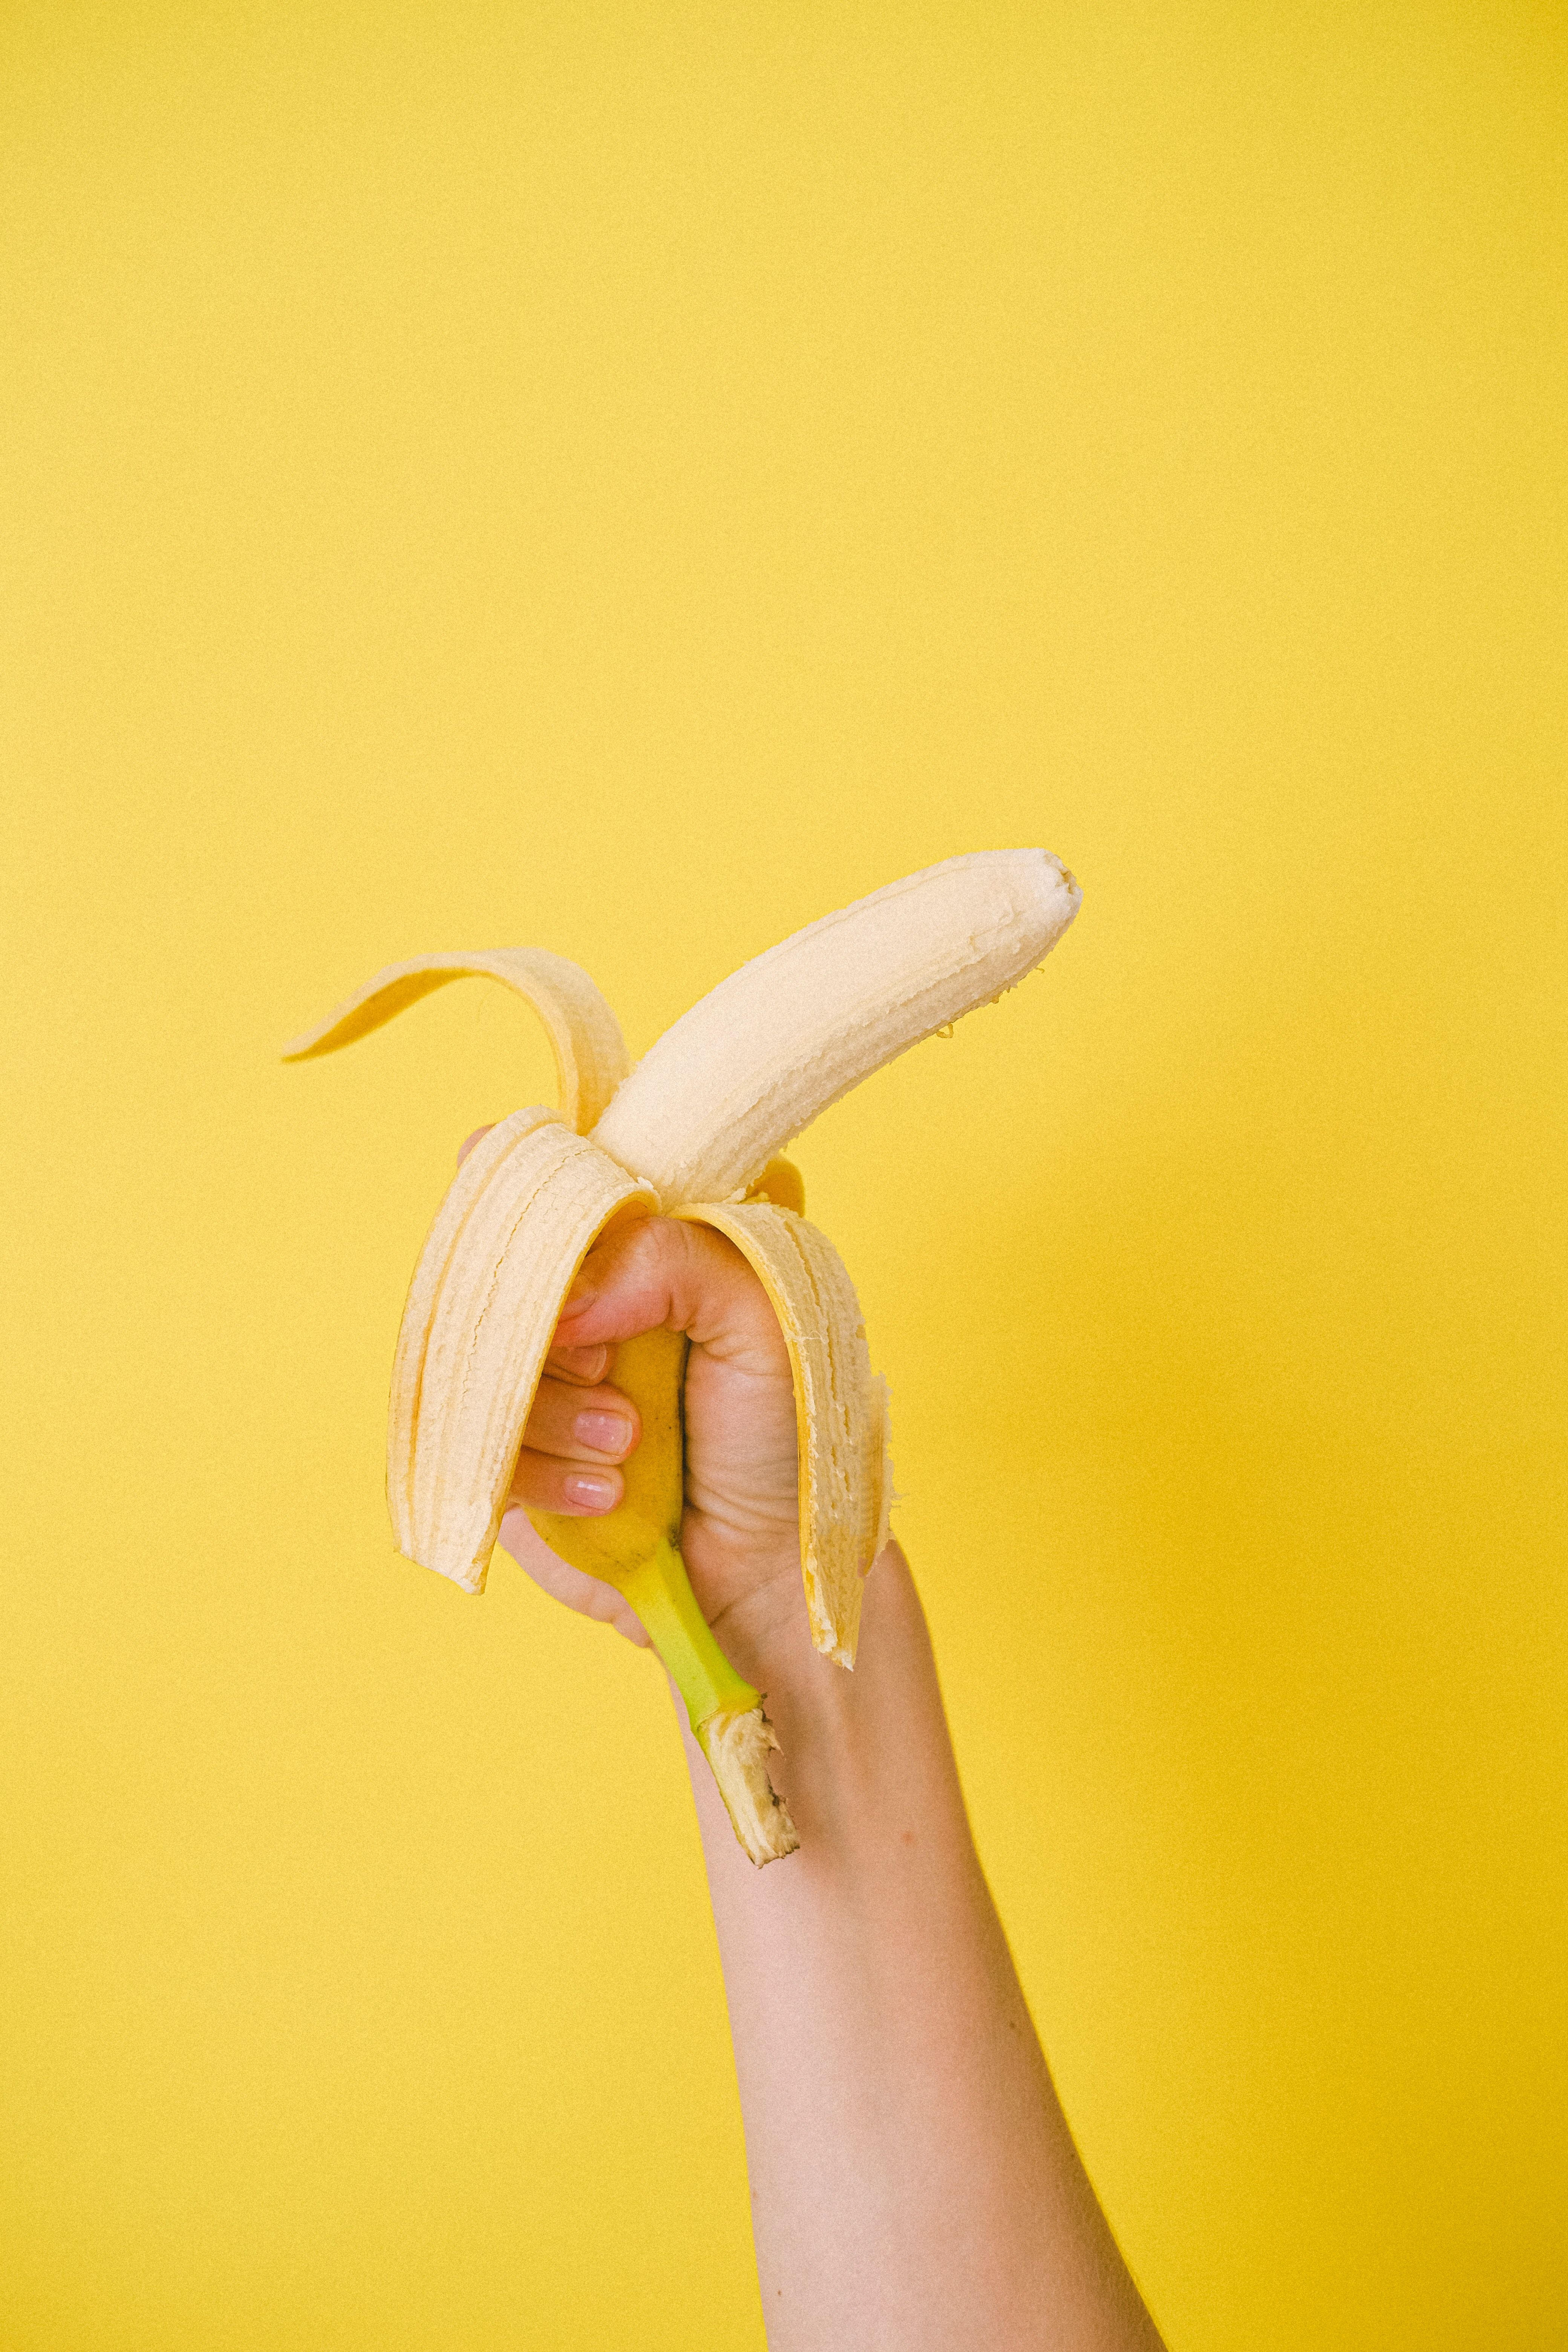 Crop unrecognizable woman with half unpeeled banana · Free